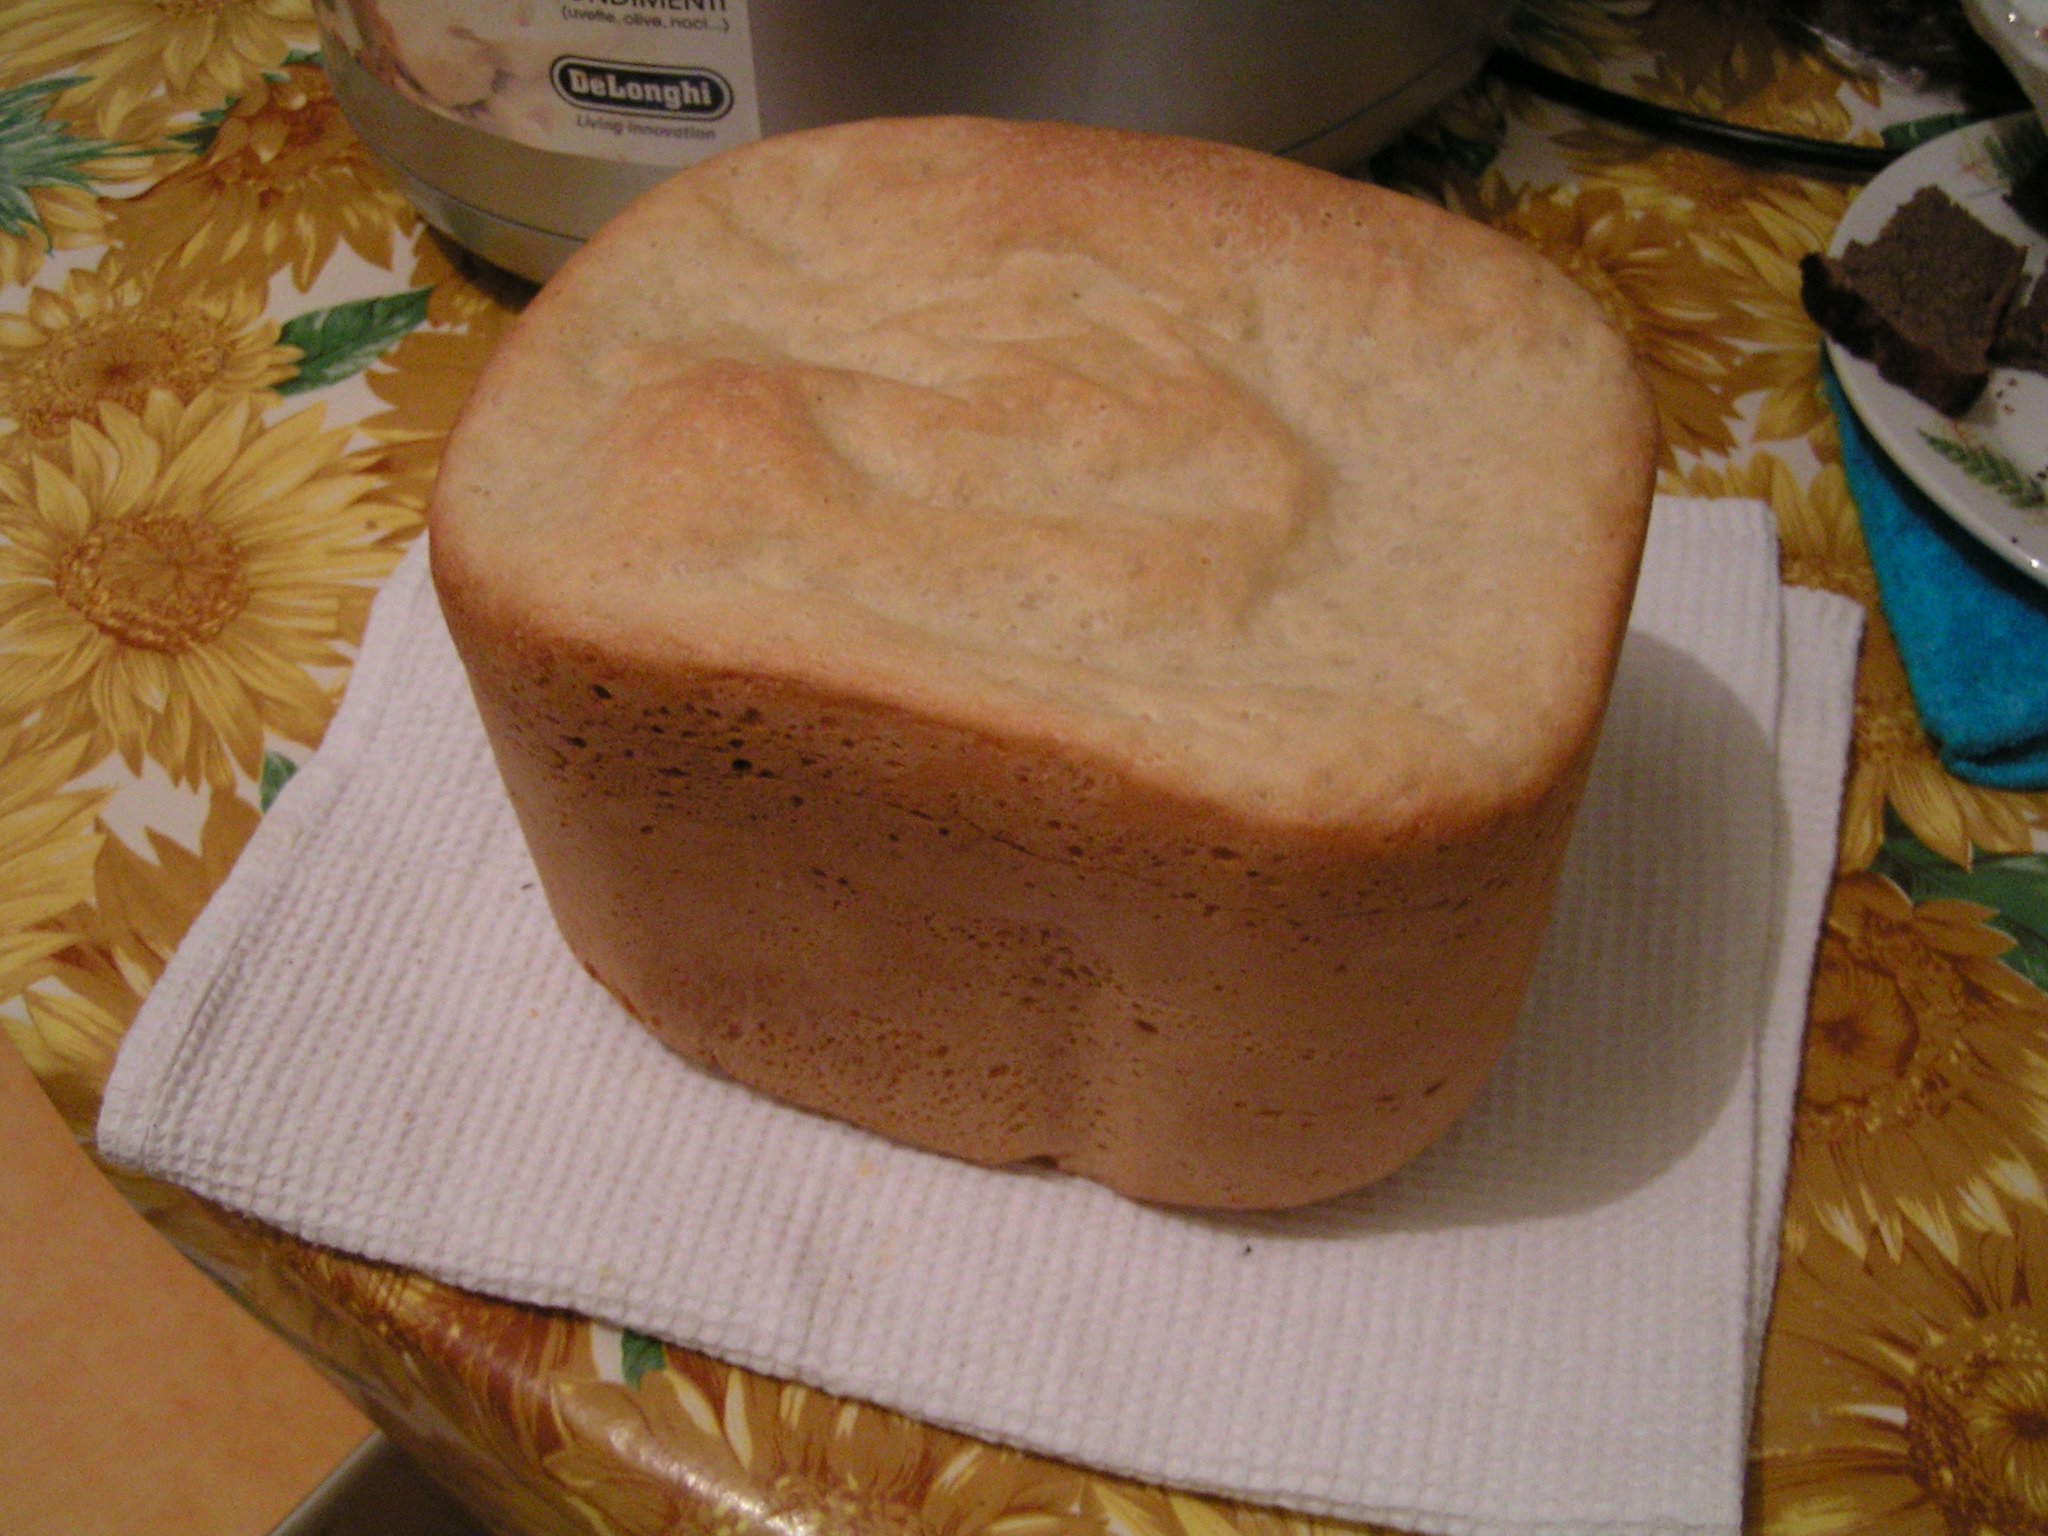 Bread loaf from the pan (oven)